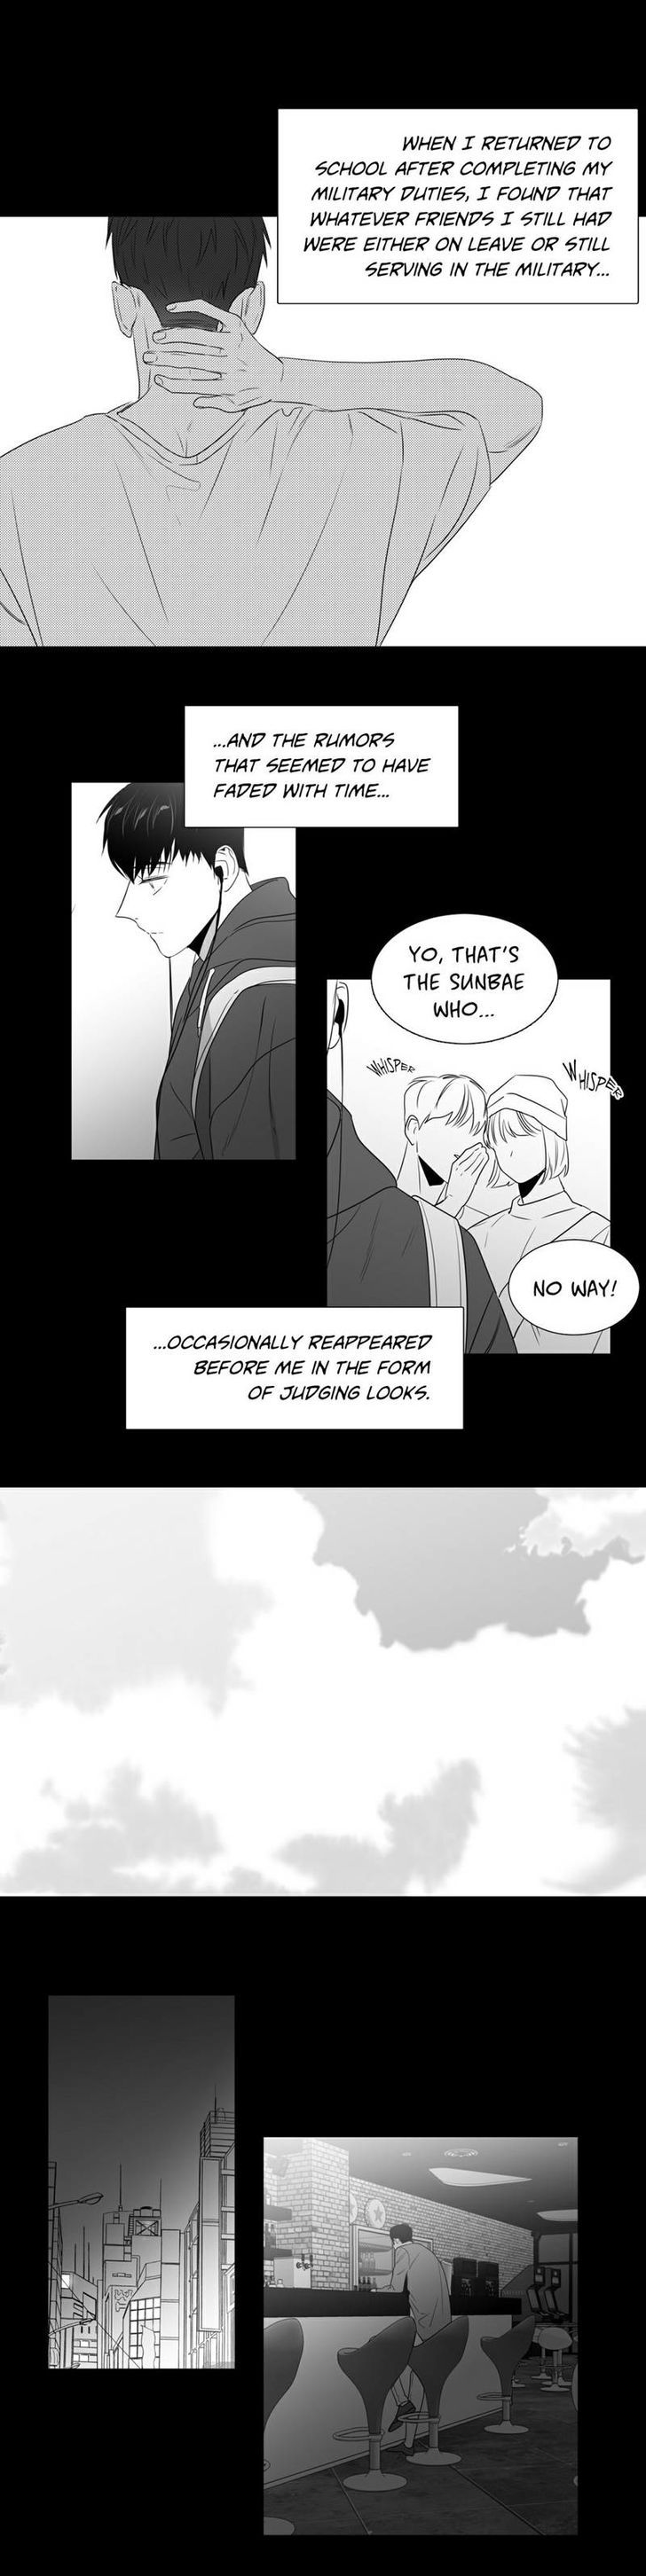 Lover Boy (Lezhin) Chapter 047.2 page 9